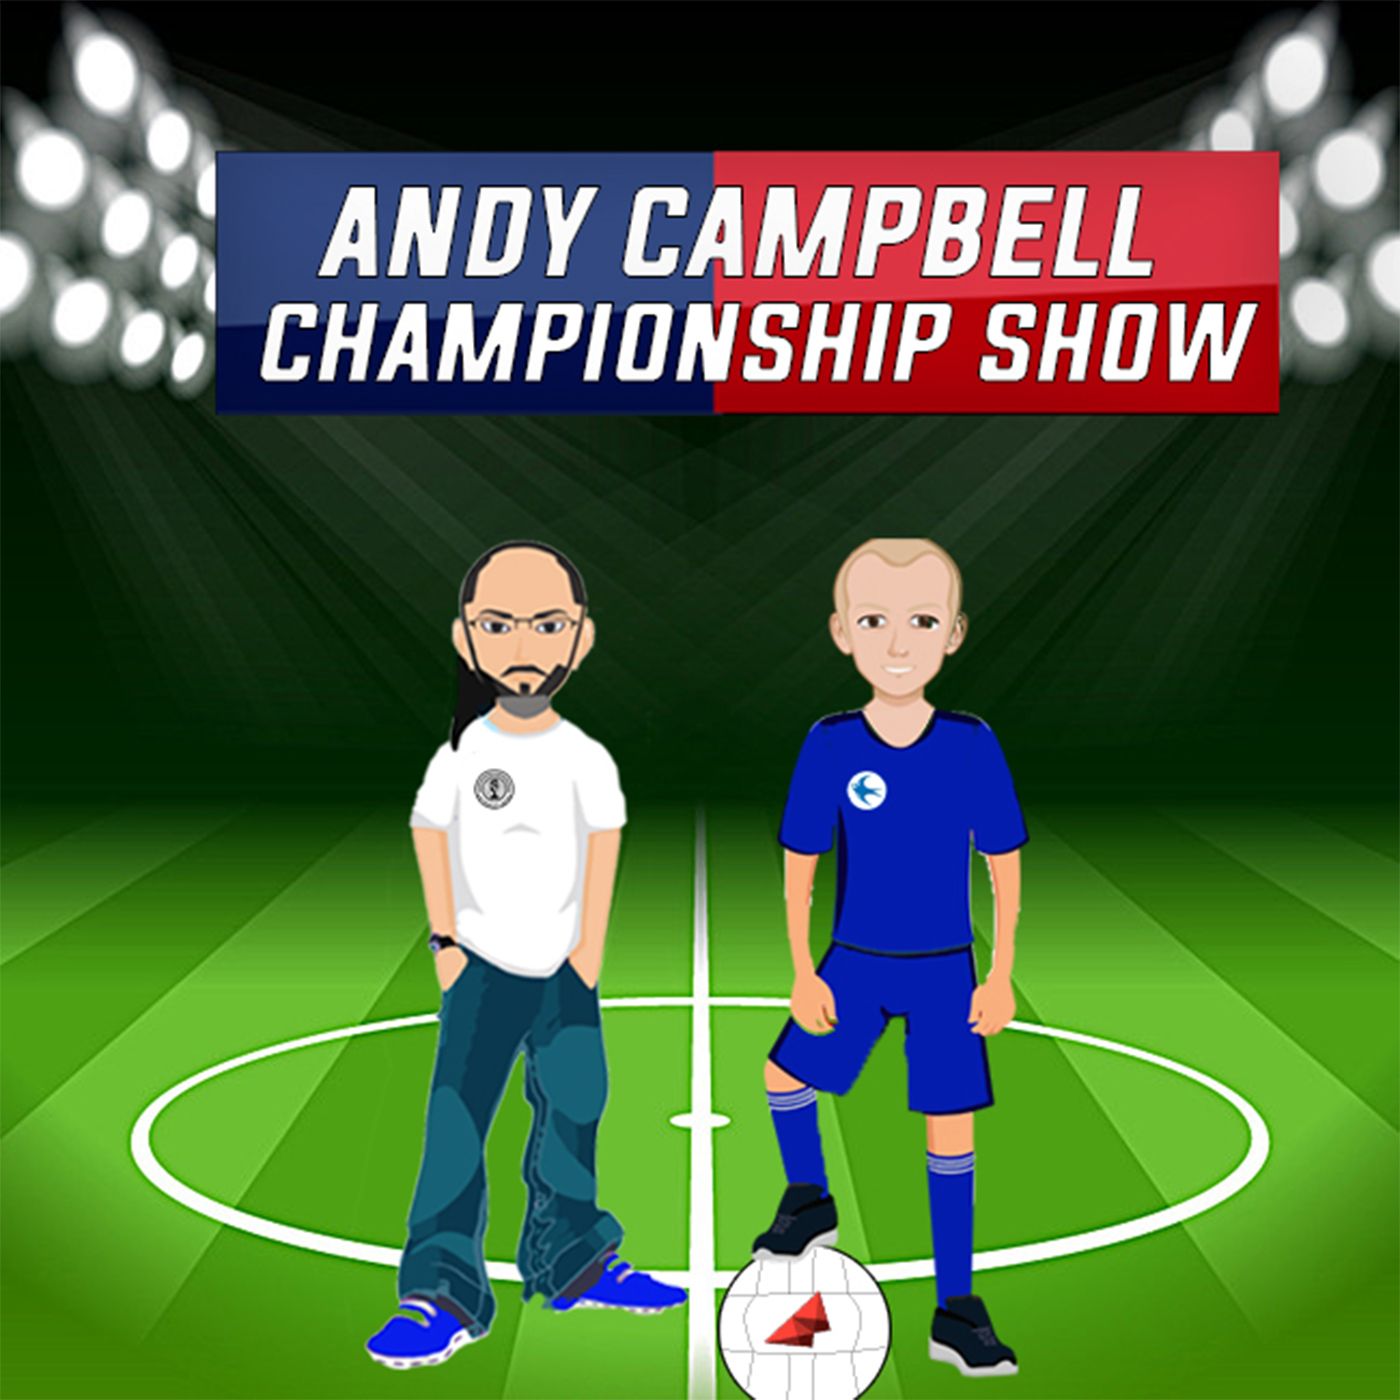 The Andy Campbell Championship Show